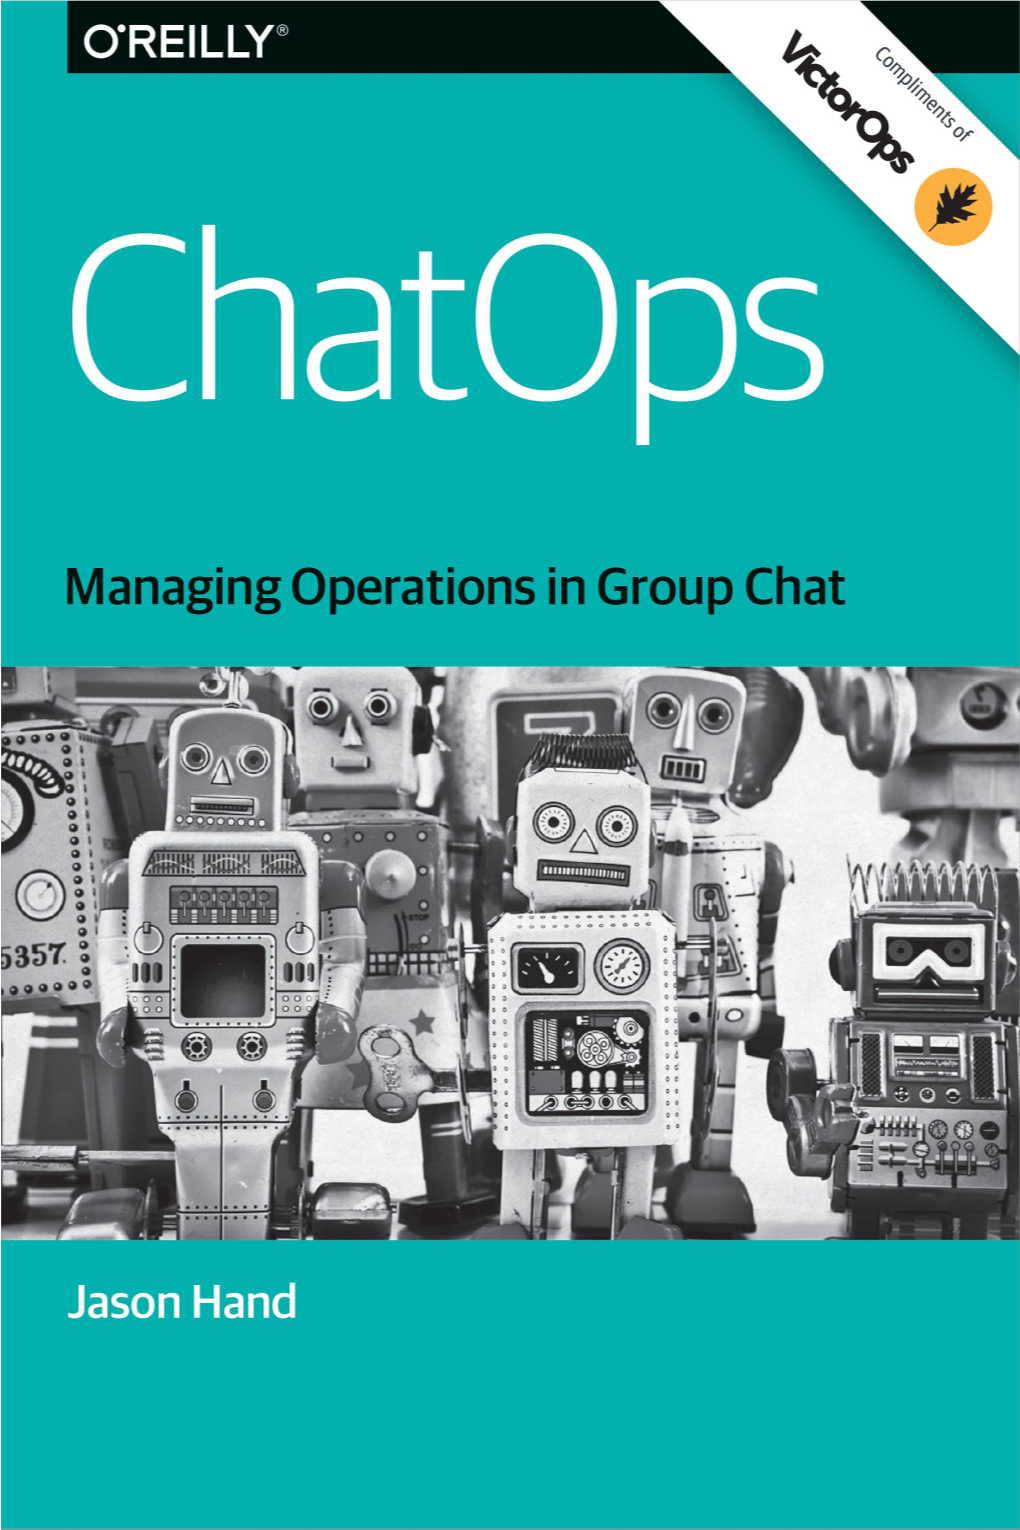 Chatops Managing Operations from Group Chat